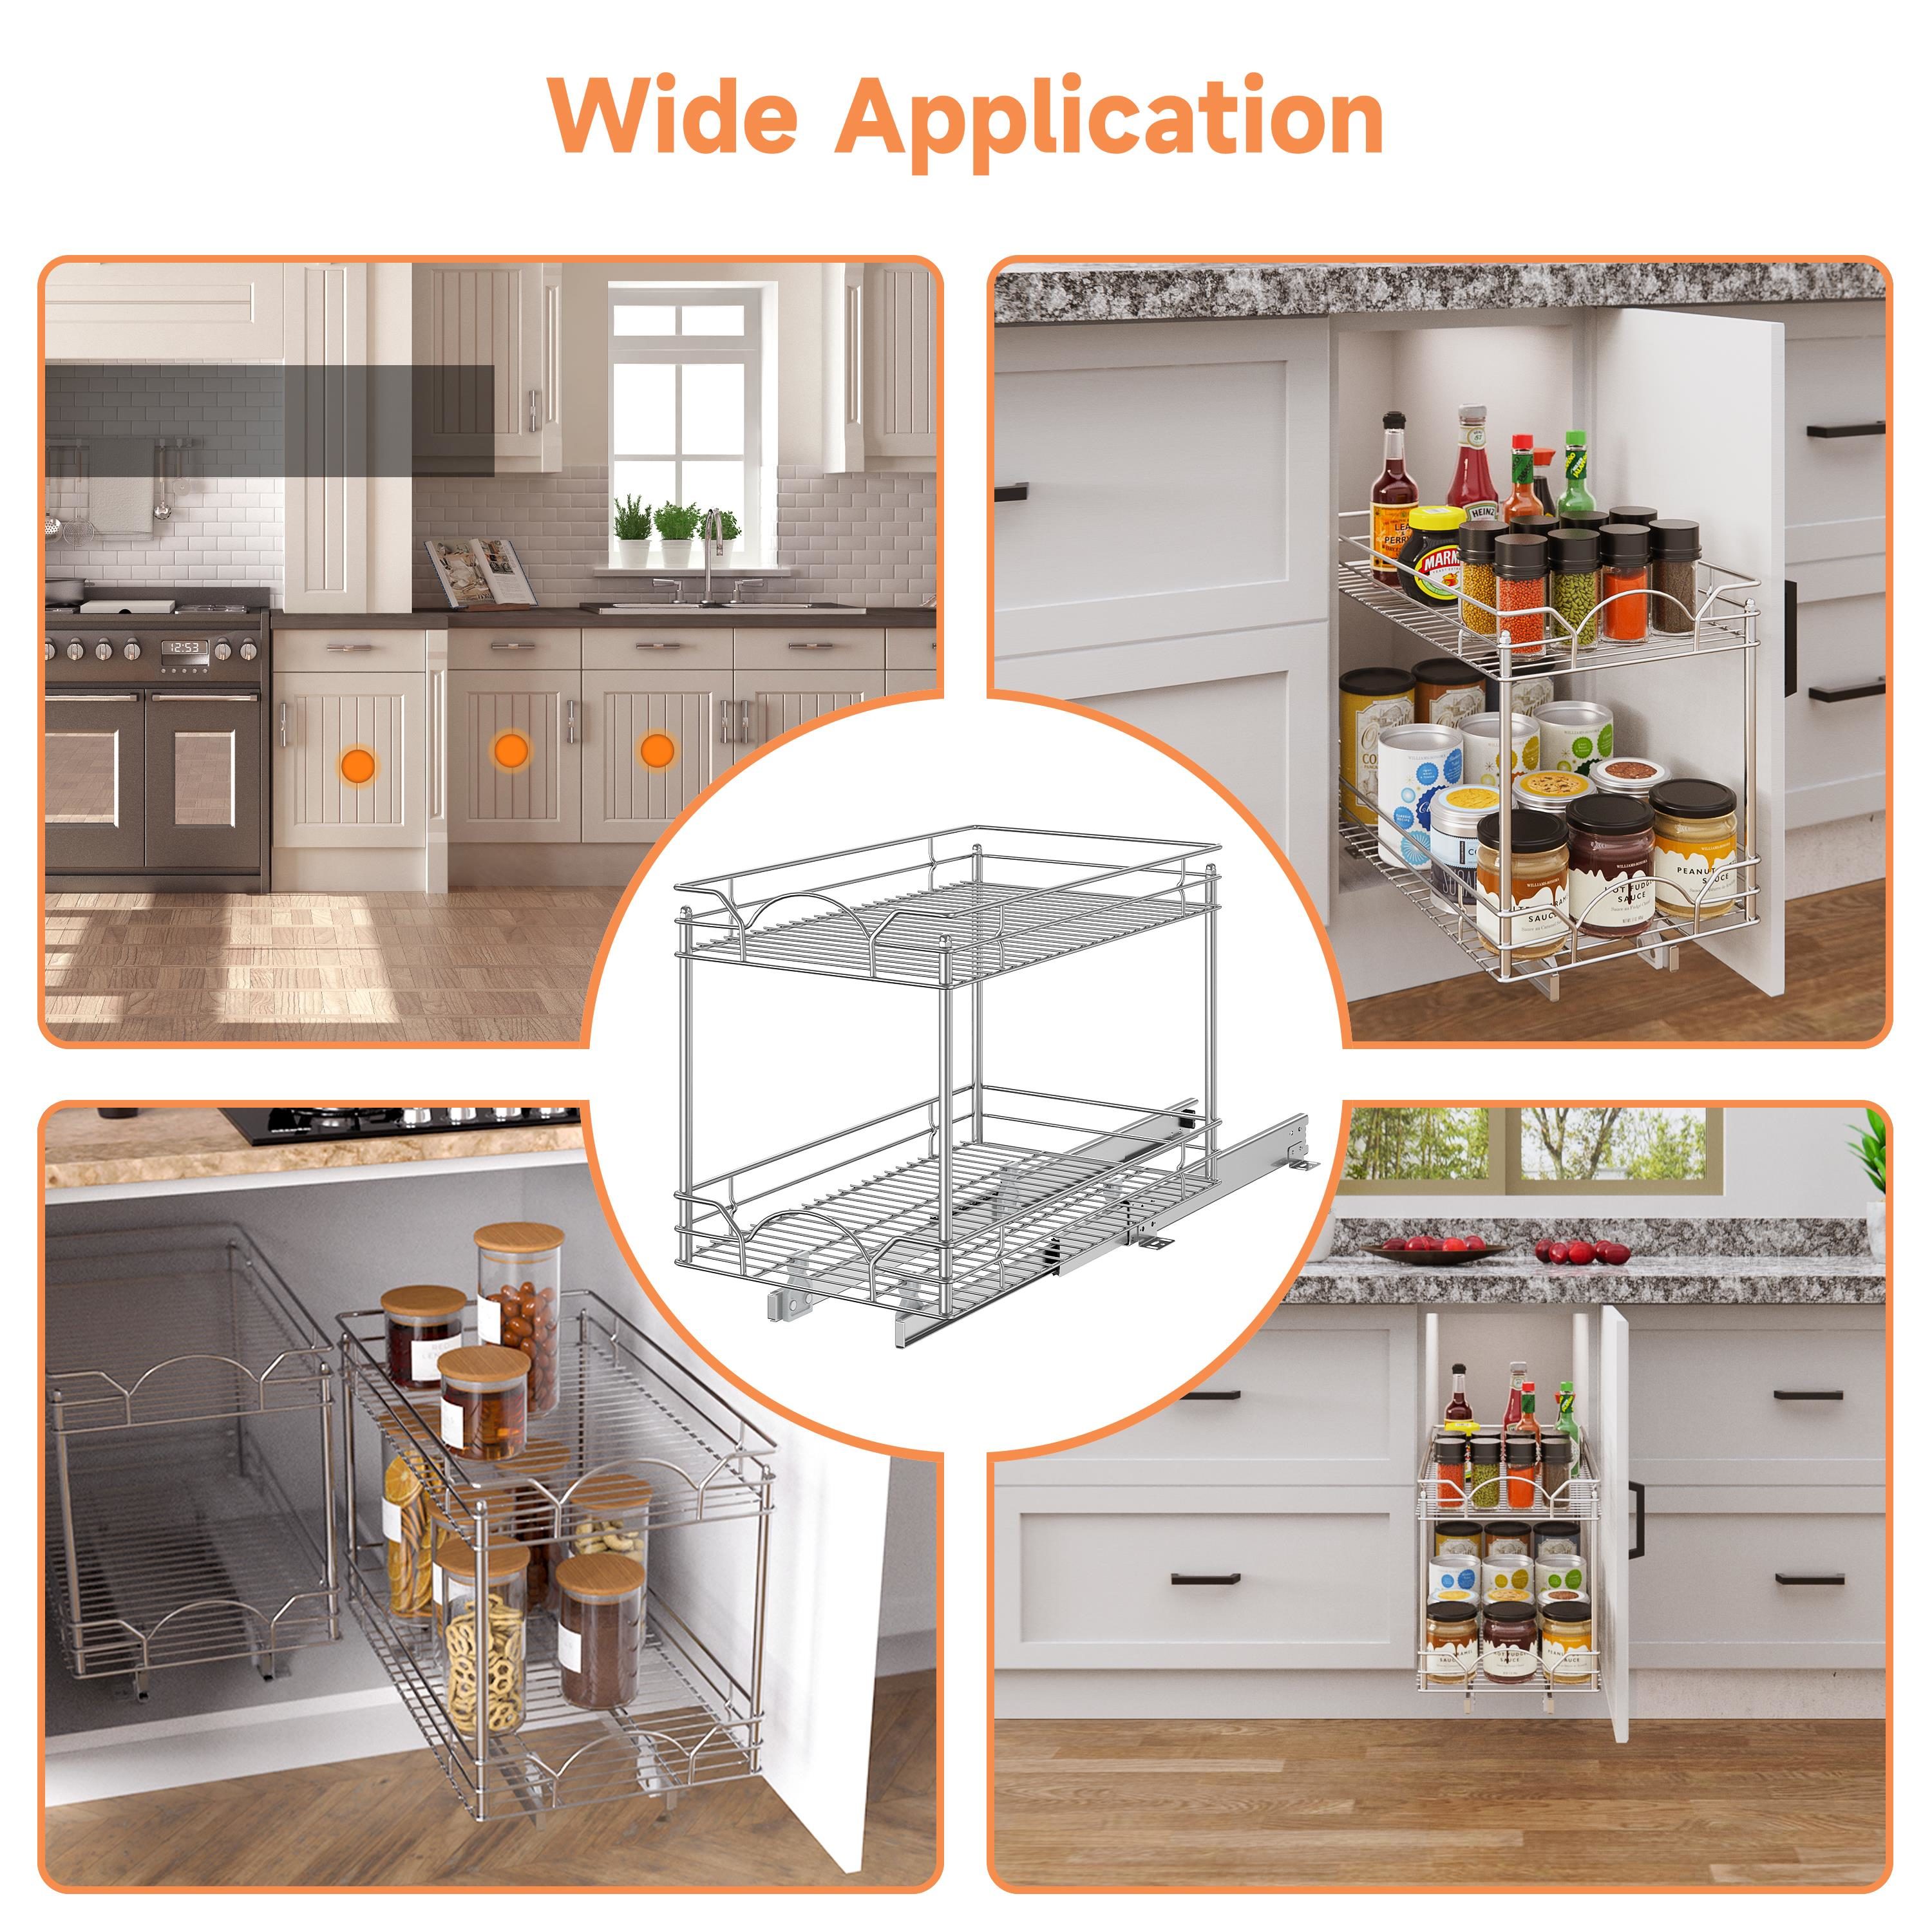 ROOMTEC New Version Pull Out Cabinet Organizer for Base Cabinet (11 W x 18 D), Kitchen Cabinet Organizer and Storage 2-Tier Cabi